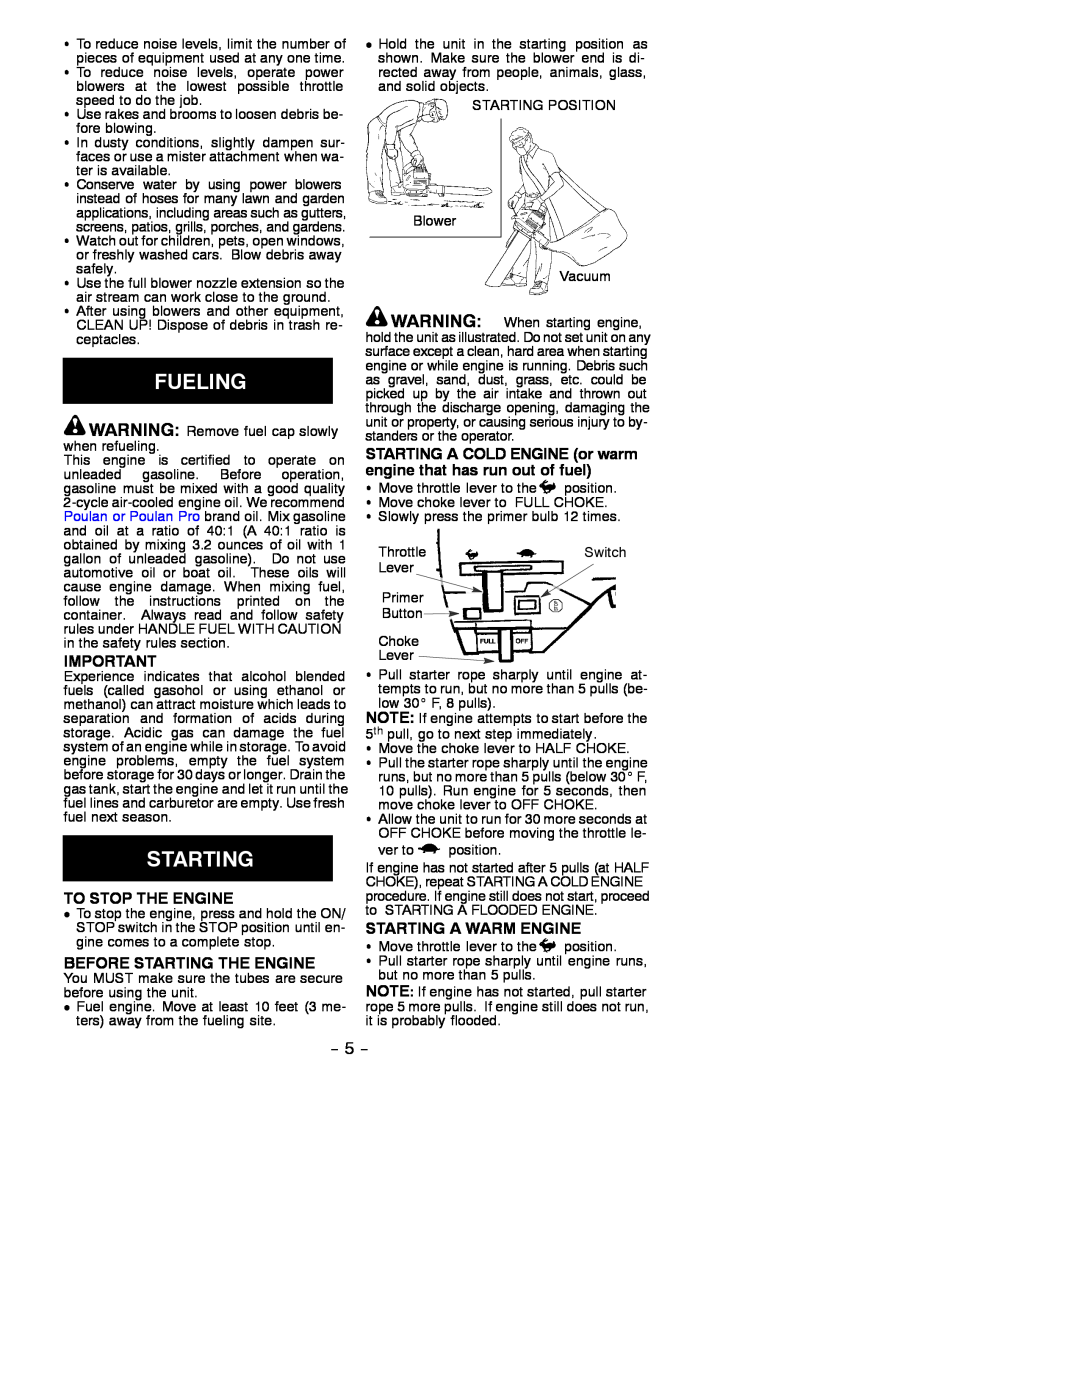 Electrolux BVM200 instruction manual To Stop The Engine, Before Starting The Engine, Starting A Warm Engine 